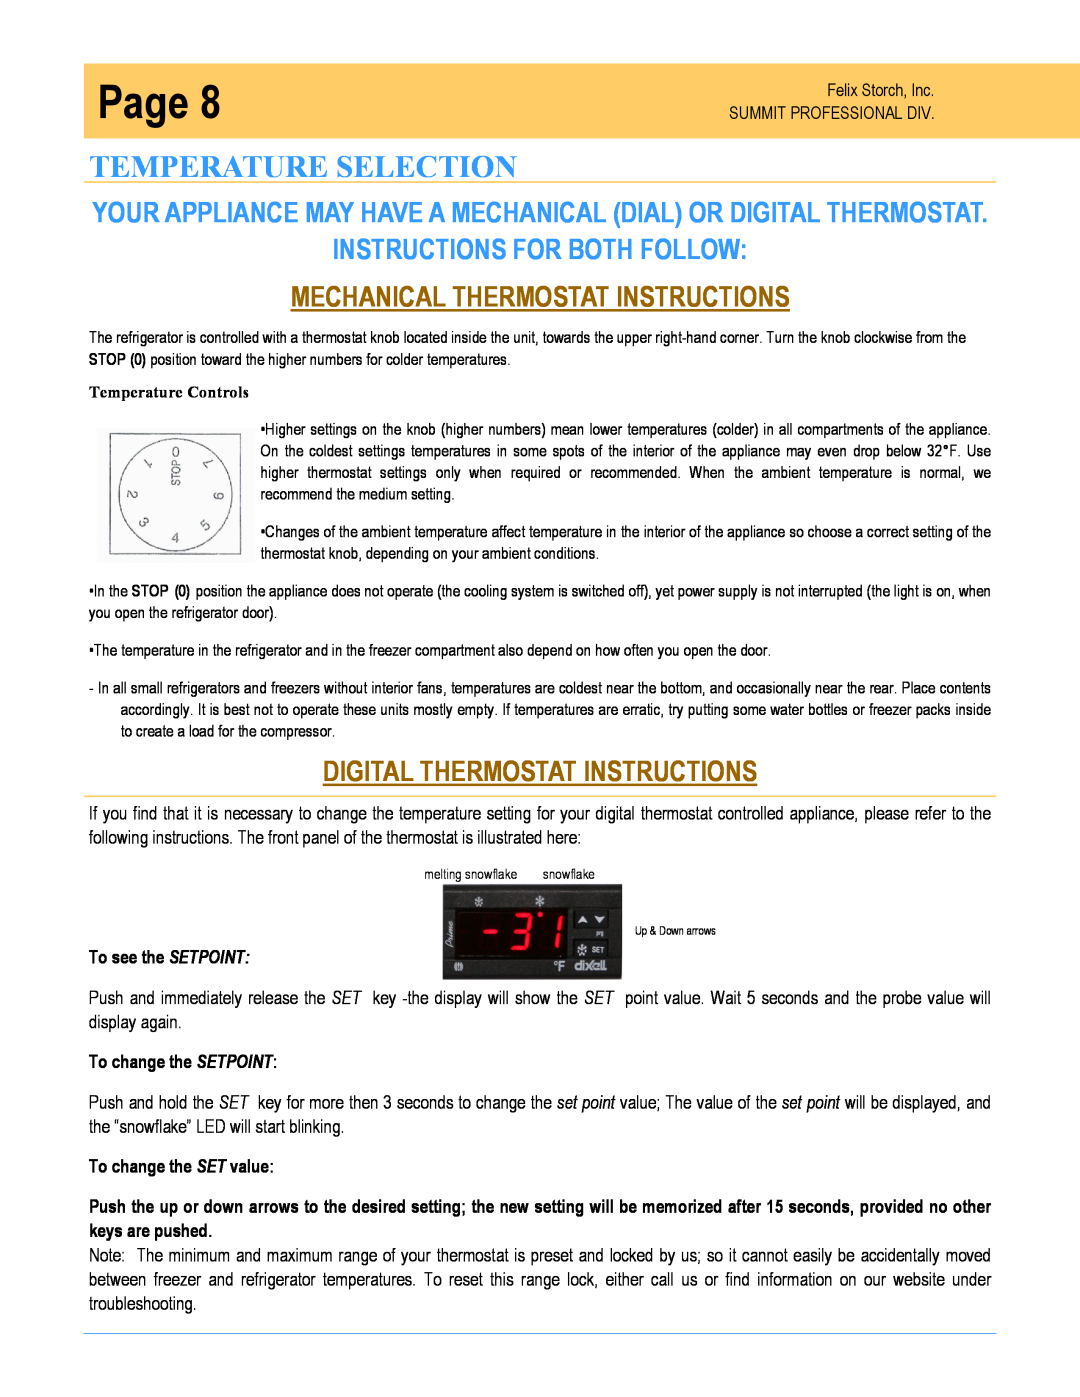 Summit SPR7OS owner manual Temperature Selection, Instructions For Both Follow, Mechanical Thermostat Instructions, Page 